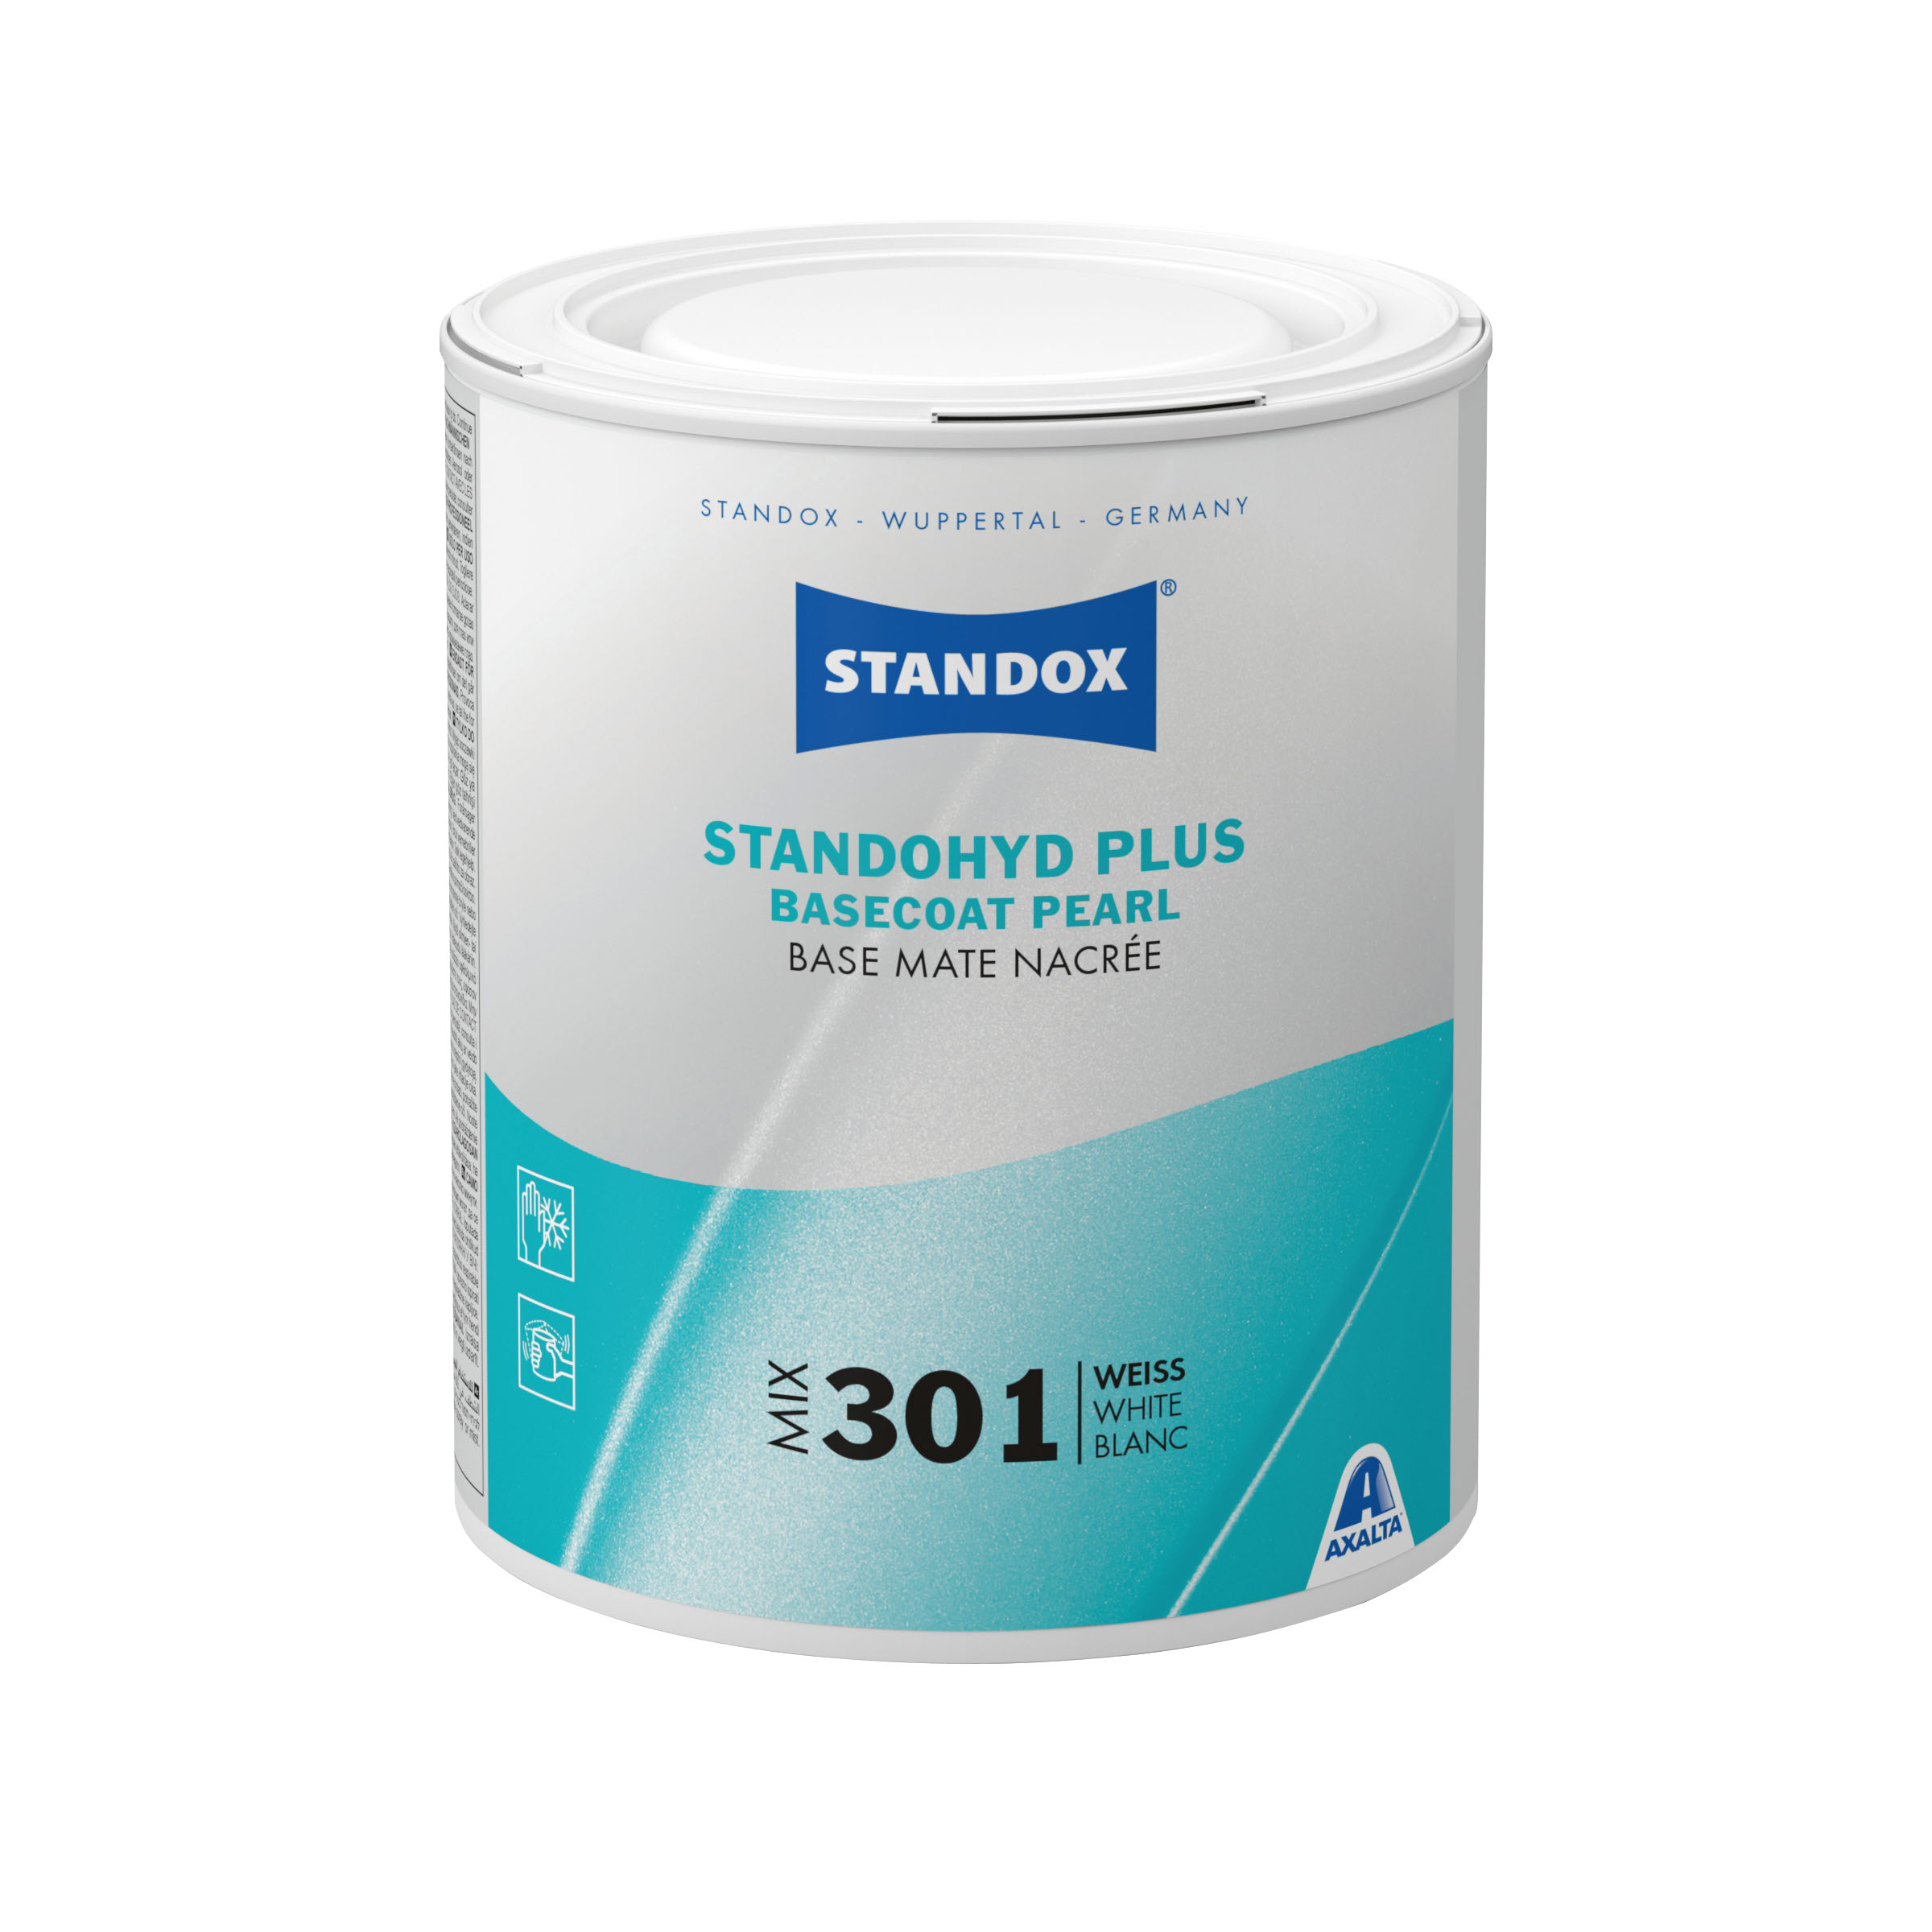 Standohyd Plus Basecoat Pearl Mix 301 weiß